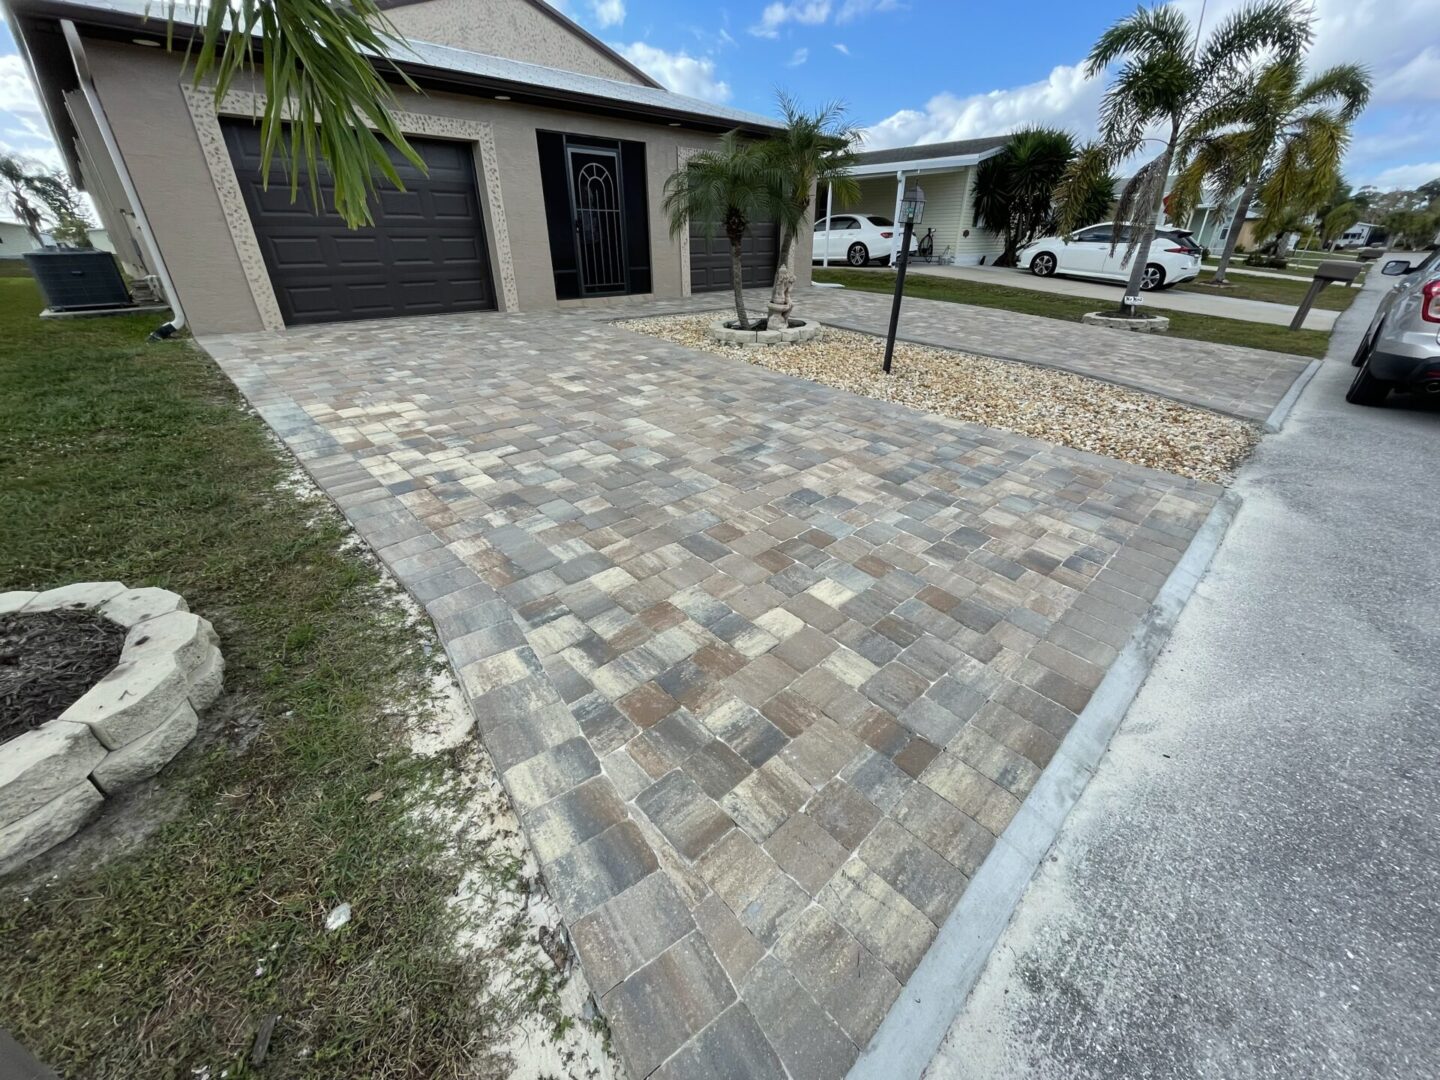 A paved driveway with a mix of beige and gray bricks leading up to a garage door. There are palm trees and a neatly landscaped garden area adjacent to the driveway.